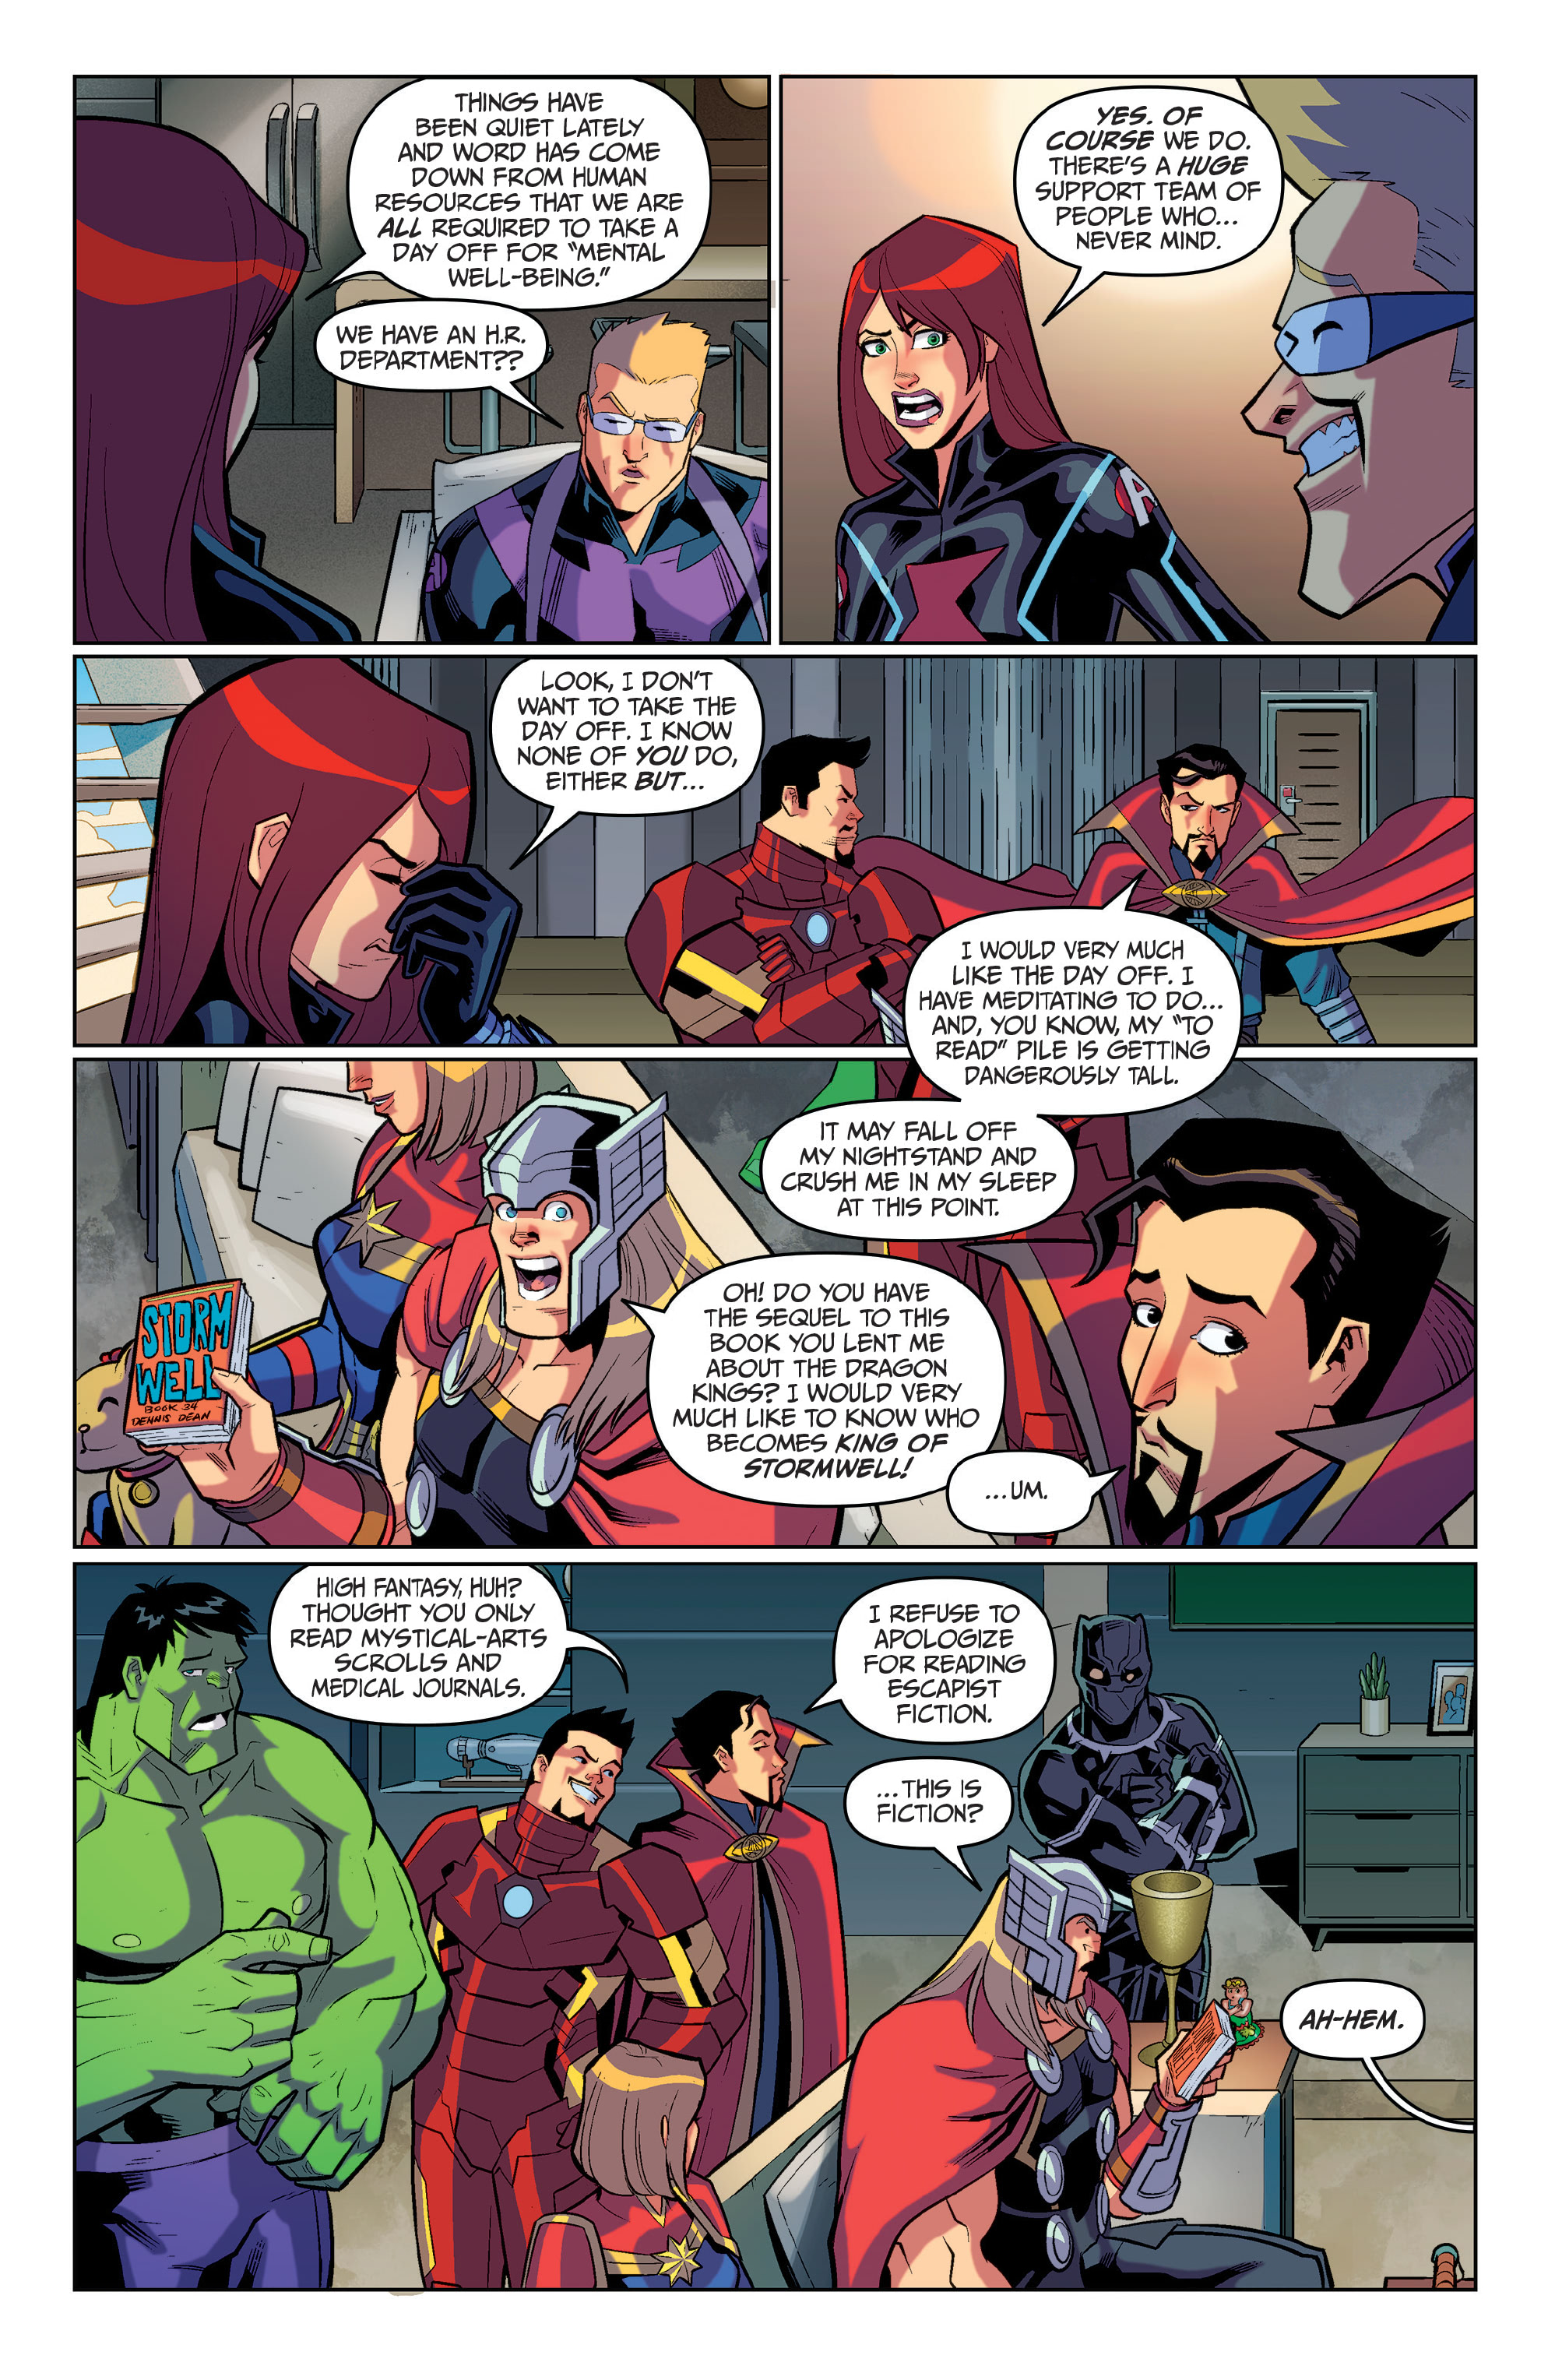 hybrid hinanden Cusco Marvel Action: Avengers (2020) Chapter 1 - Page 4